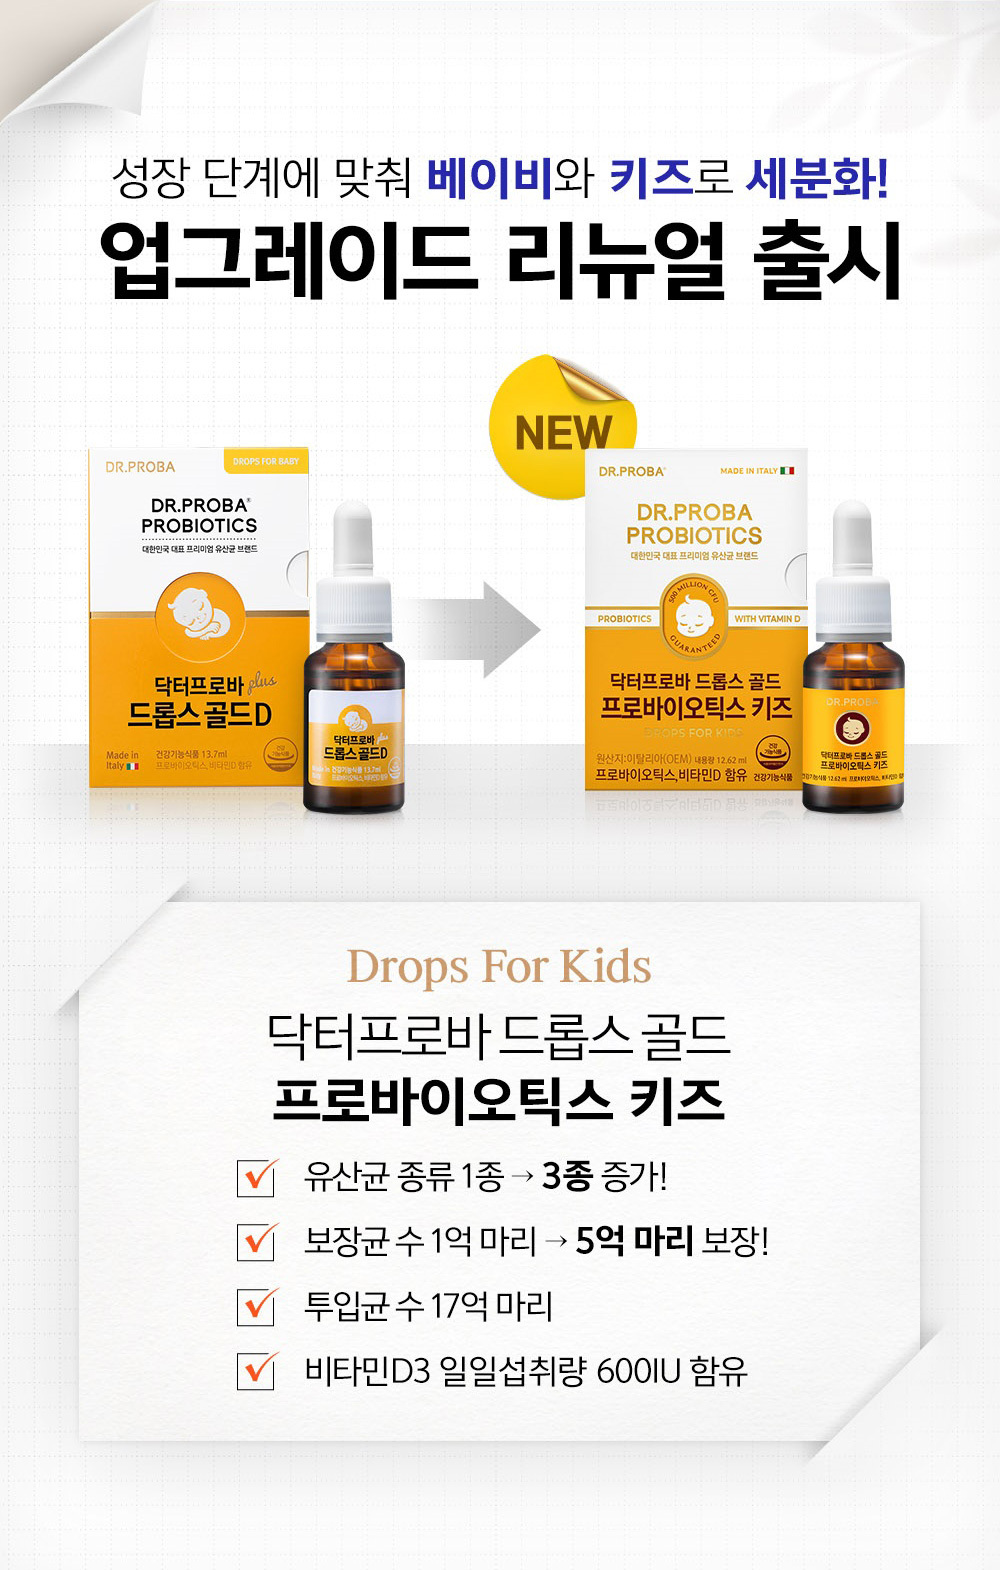 Upgrade renewal launch, segmented into baby and kids according to growth stage Drops For Kids Dr. Proba Drops Gold Probiotics Kids 1 type of lactic acid bacteria -- 3 more types! Guaranteed number of bacteria: 100 million -- 500 million bacteria guaranteed! Contains 1.7 billion bacteria and 600IU daily intake of vitamin D3.